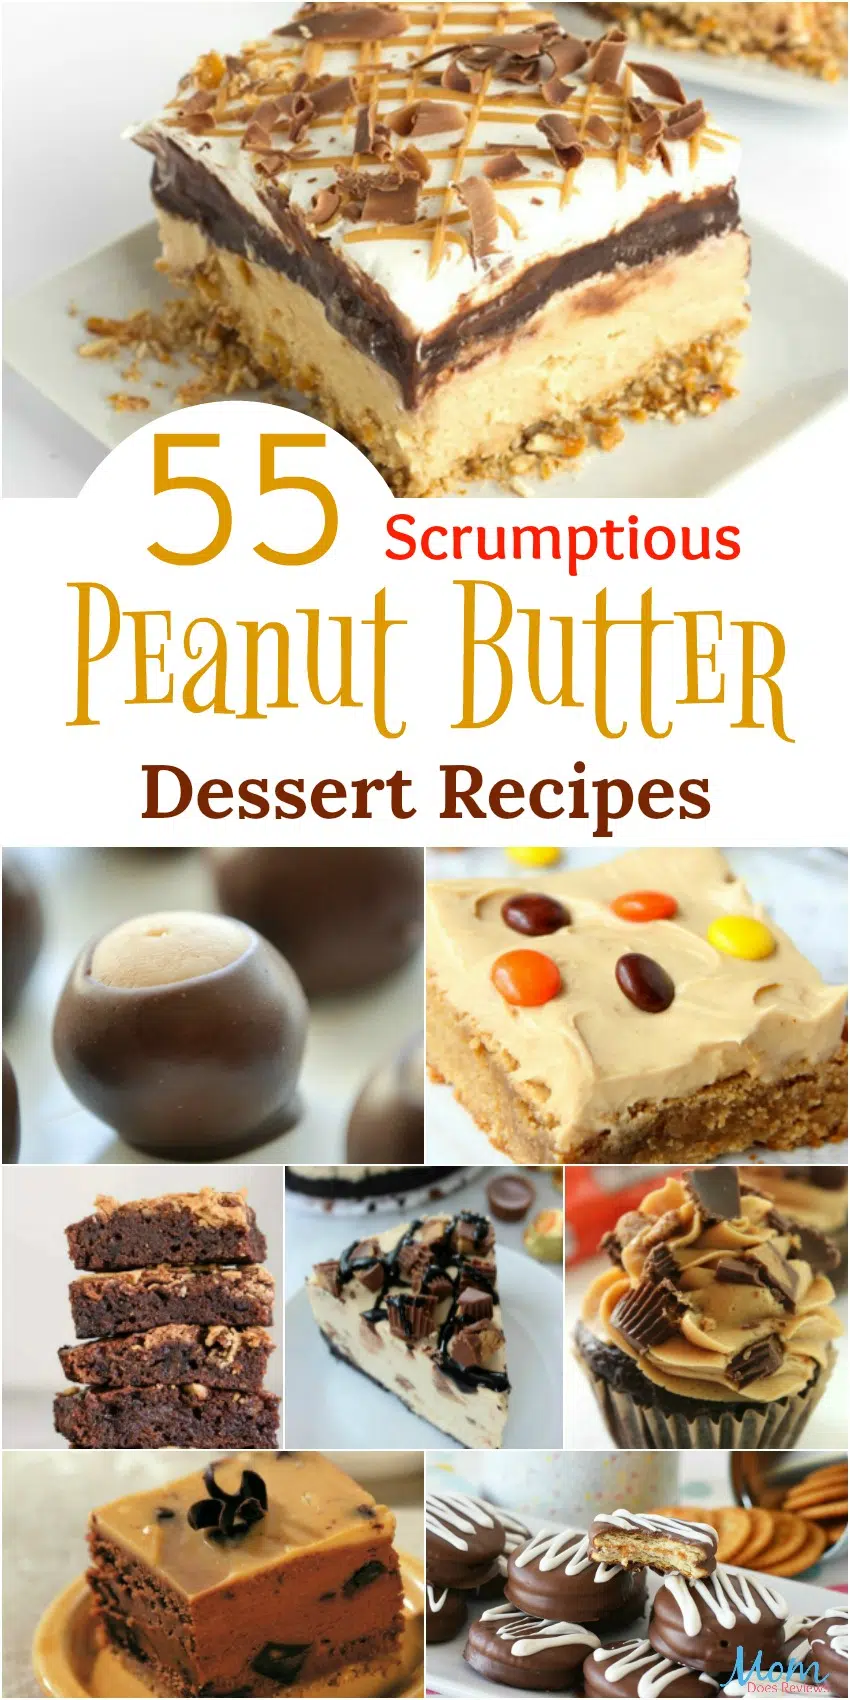 55 Scrumptious Peanut Butter Dessert Recipes that will Make you Drool {Part 1} #desserts #sweets #peanutbutter #recipes #getinmybelly